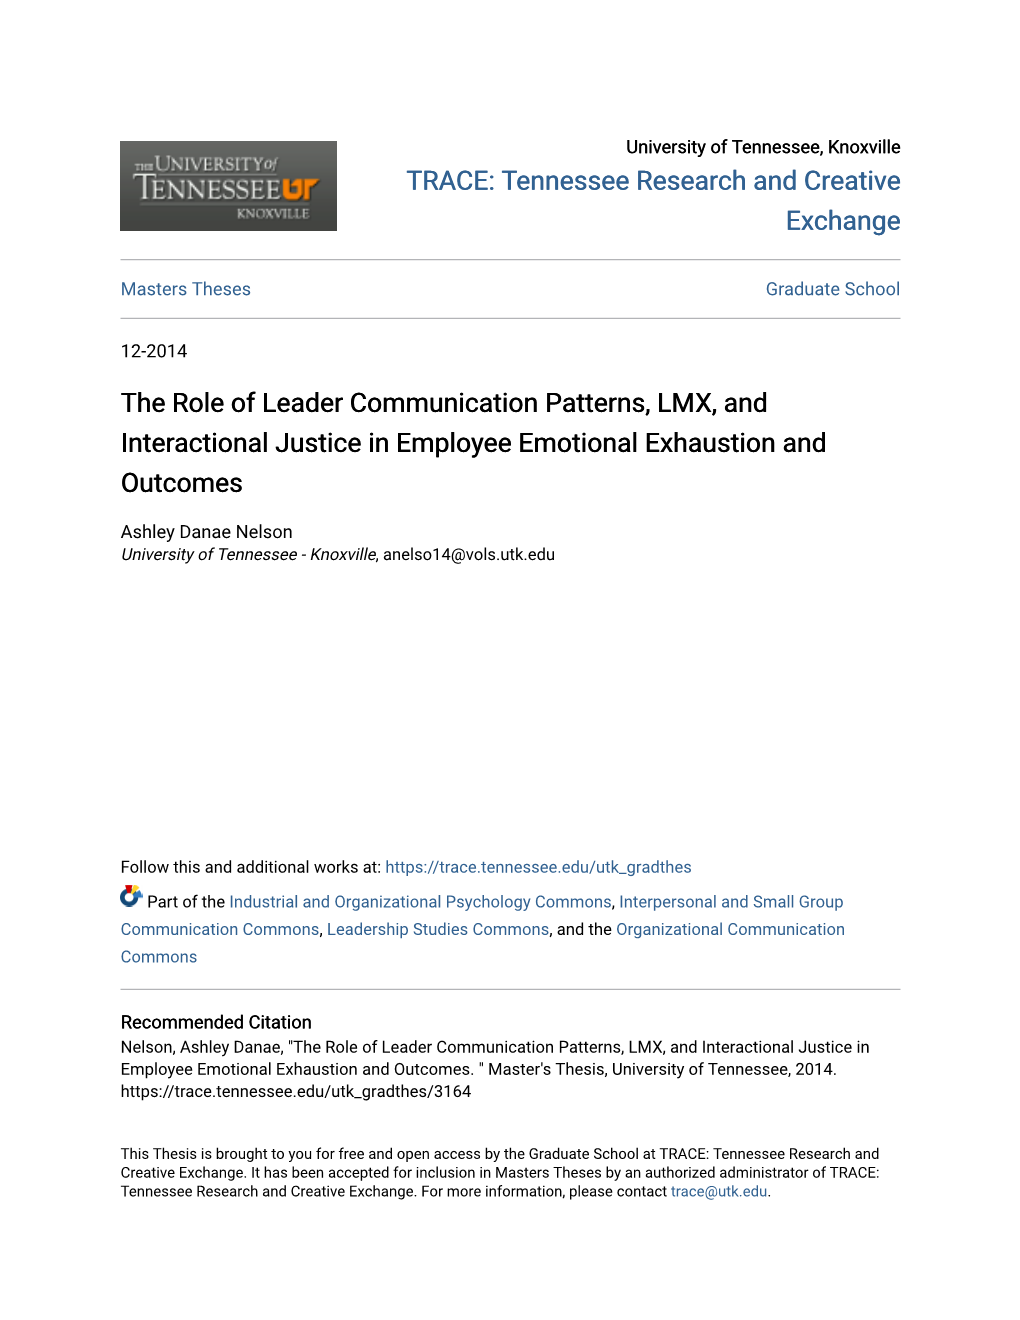 The Role of Leader Communication Patterns, LMX, and Interactional Justice in Employee Emotional Exhaustion and Outcomes